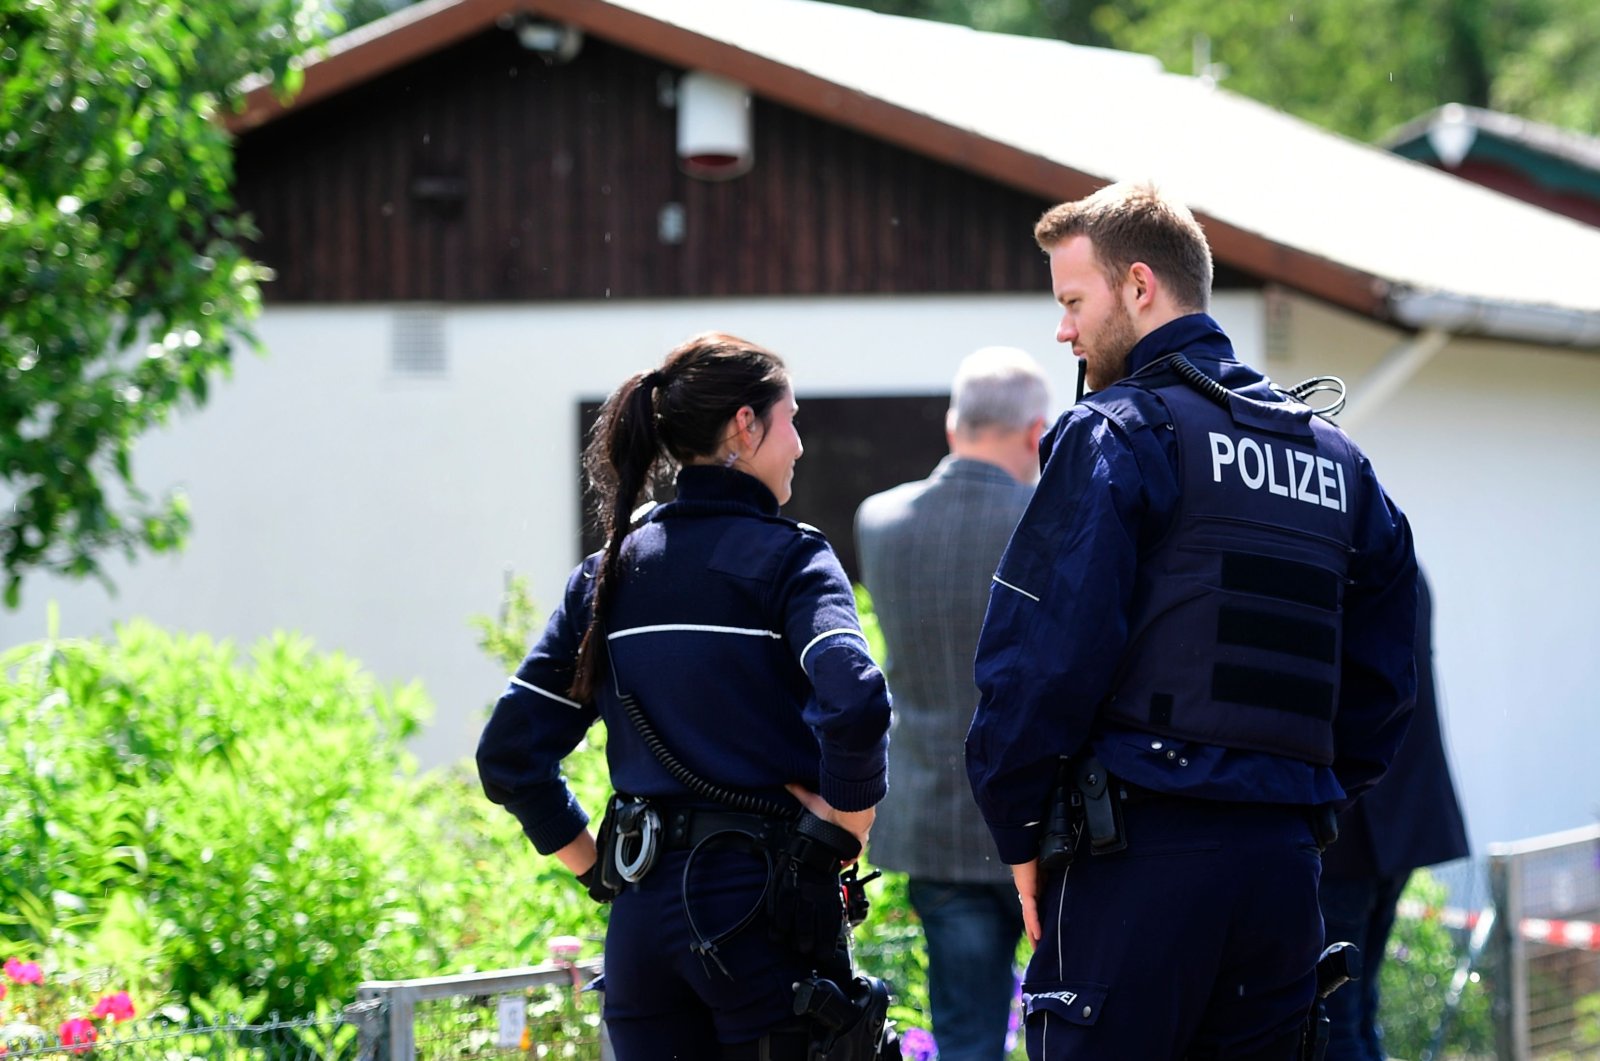 Police officers stand in front of a summer house where the sexual abuse of children is suspected to have taken place in Muenster, western Germany on June 6, 2020. (AFP Photo)